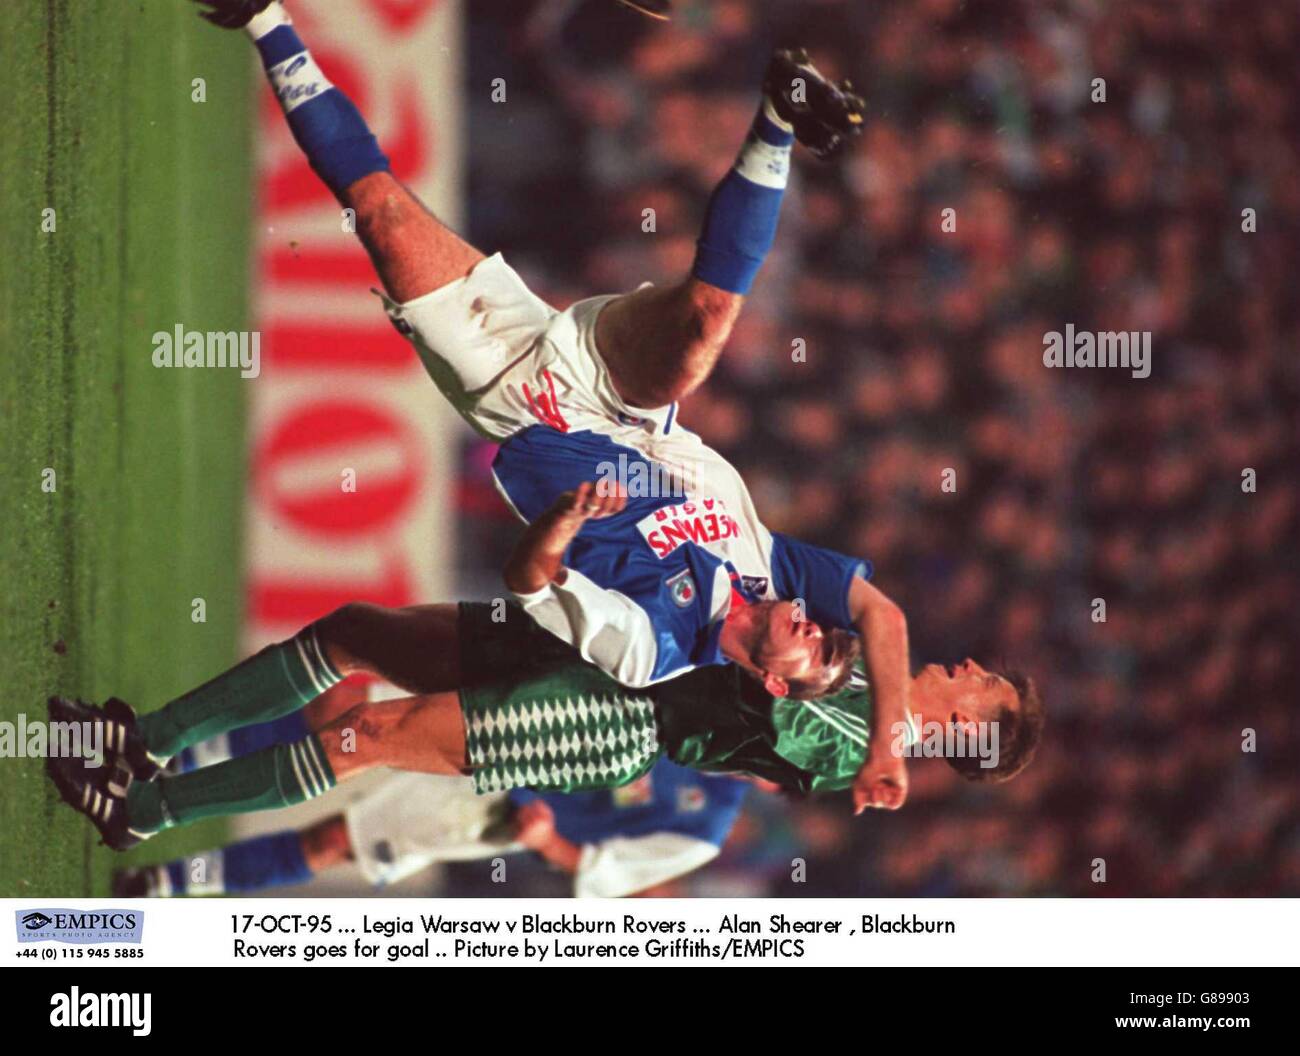 17-OCT-95, Legia Warsaw v Blackburn Rovers, Alan Shearer, Blackburn Rovers goes for goal .. Picture by Laurence Griffiths/EMPICS Stock Photo